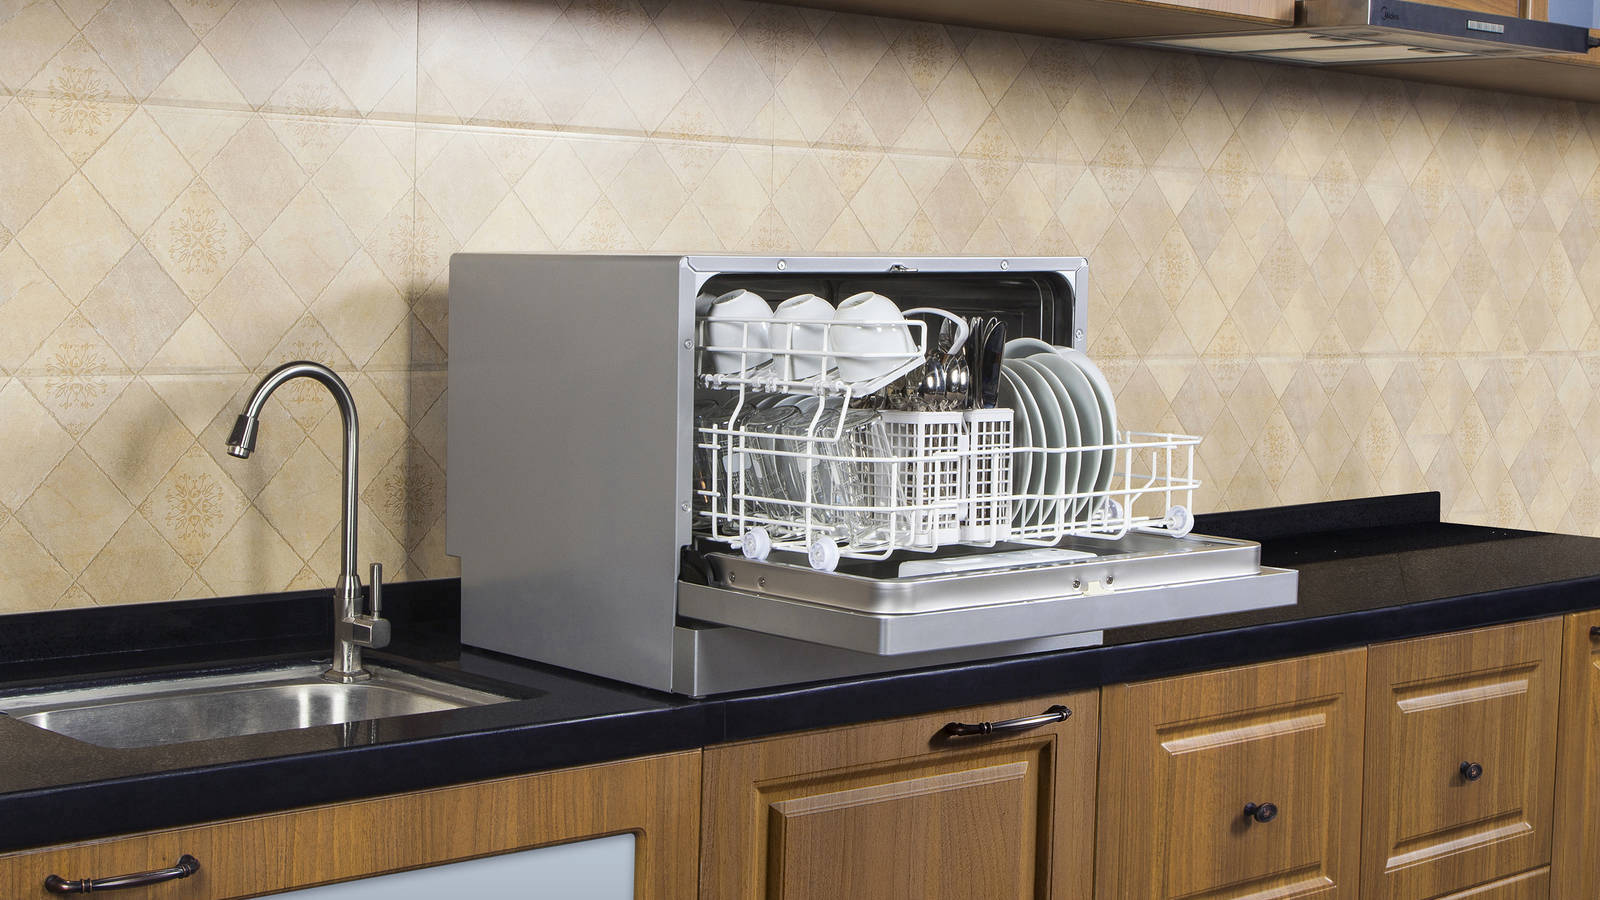 Mini dishwasher for your kitchen countertop